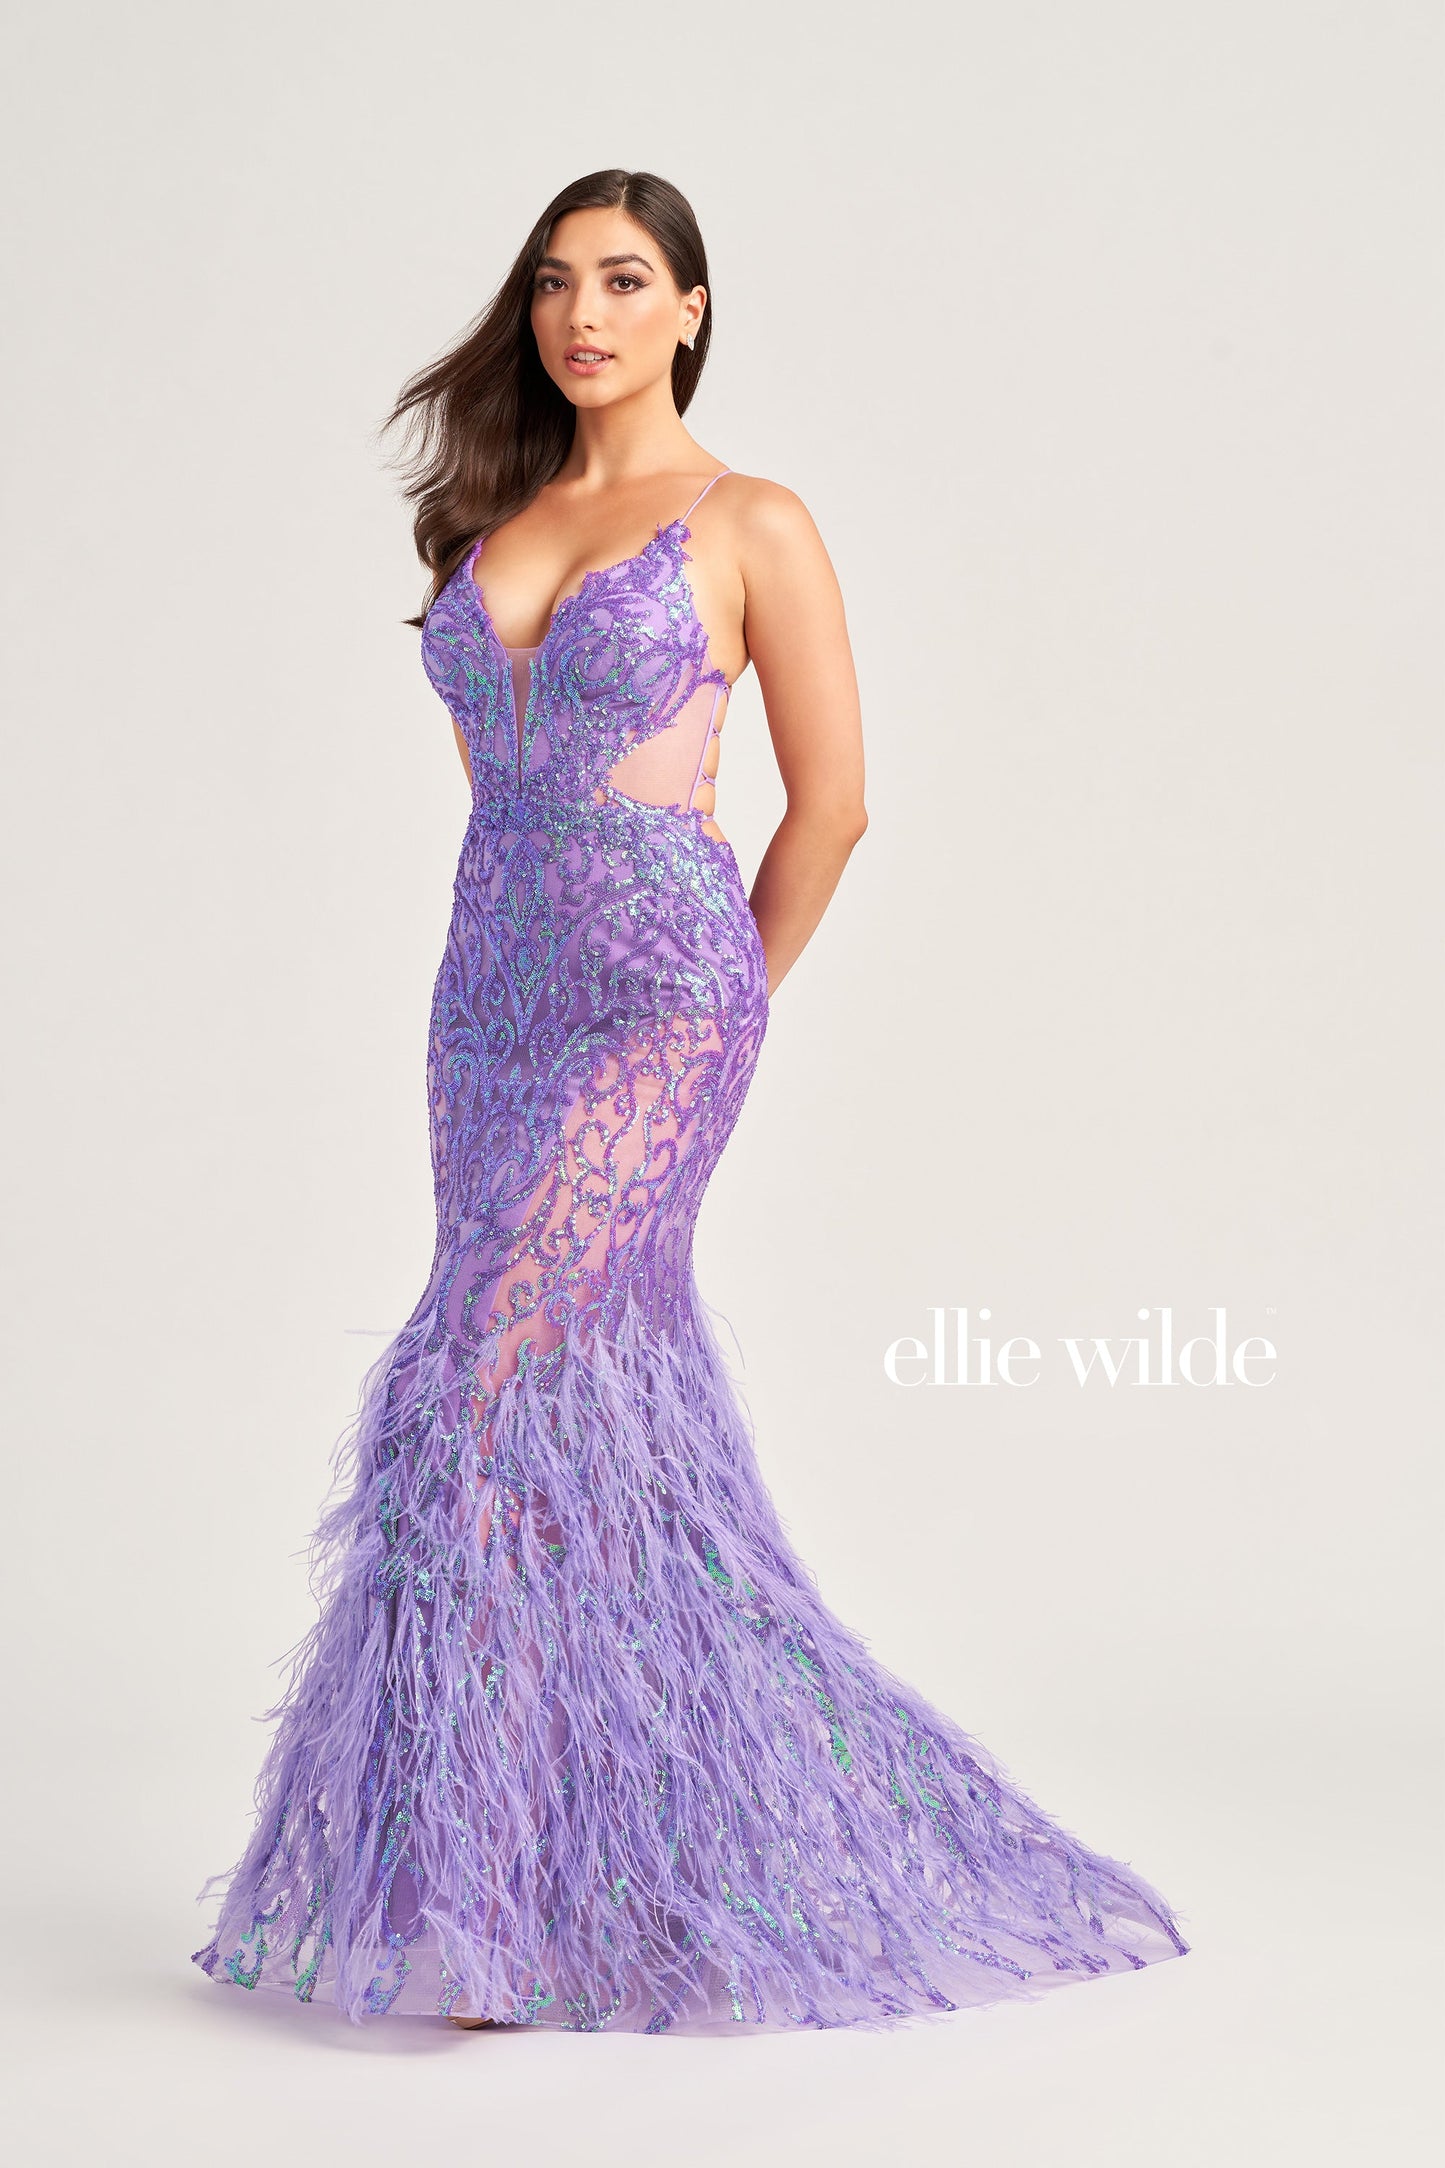 The Ellie Wilde EW35006 Sheer Sequin Prom Dress Gown features a low lace-up back with a side waist mesh inset corset and a glamorous, full-length feather skirt. Look stunning on your special night with this luxurious backless gown.  COLOR: ORANGE, CHAMPAGNE, EMERALD, HOT PINK, IRIS SIZE: 00 - 16